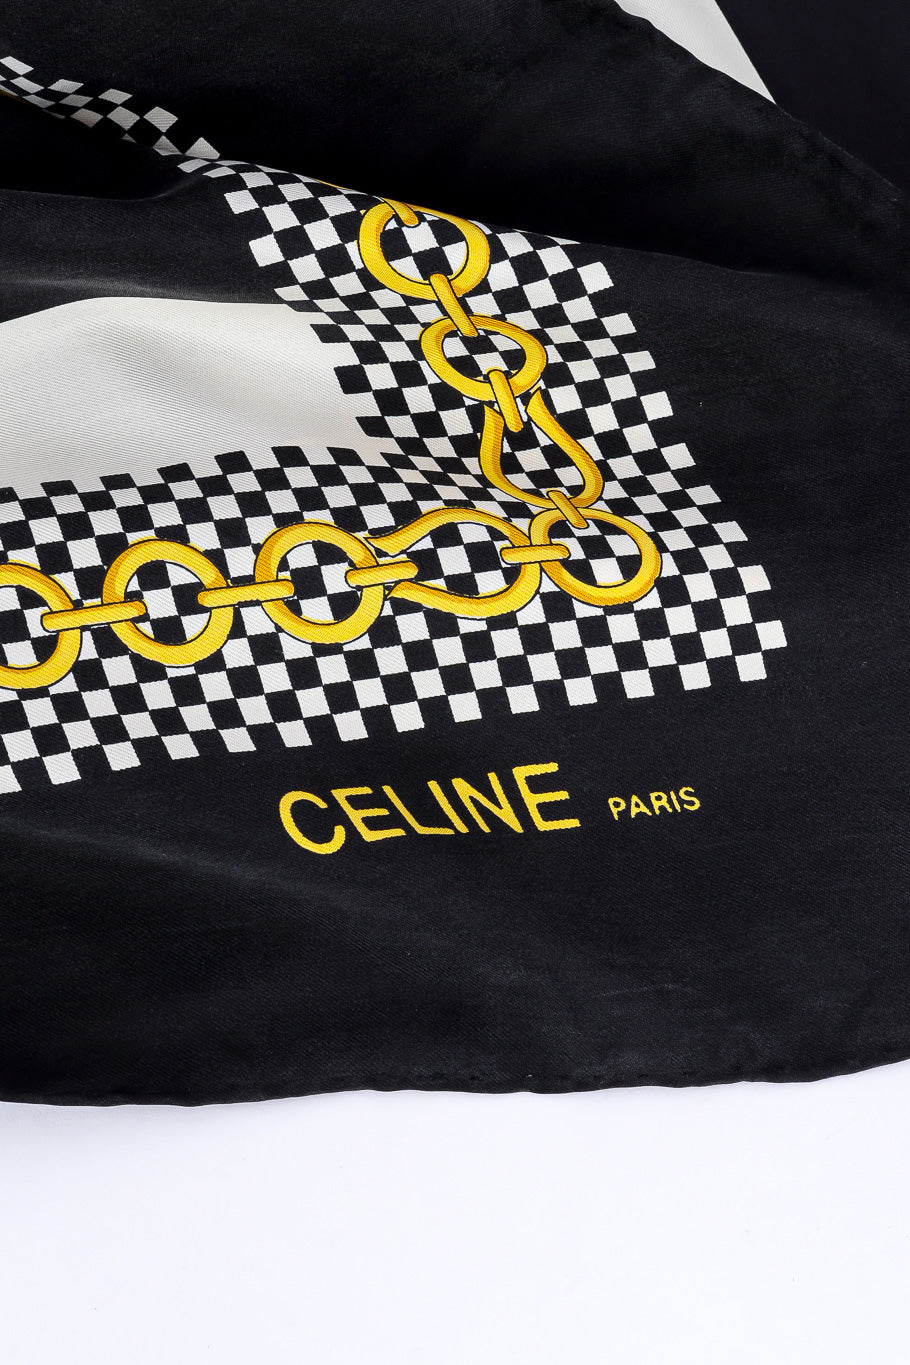 Equestrian chain graphic scarf by Celine photo of graphic details of designer logo. @recessla